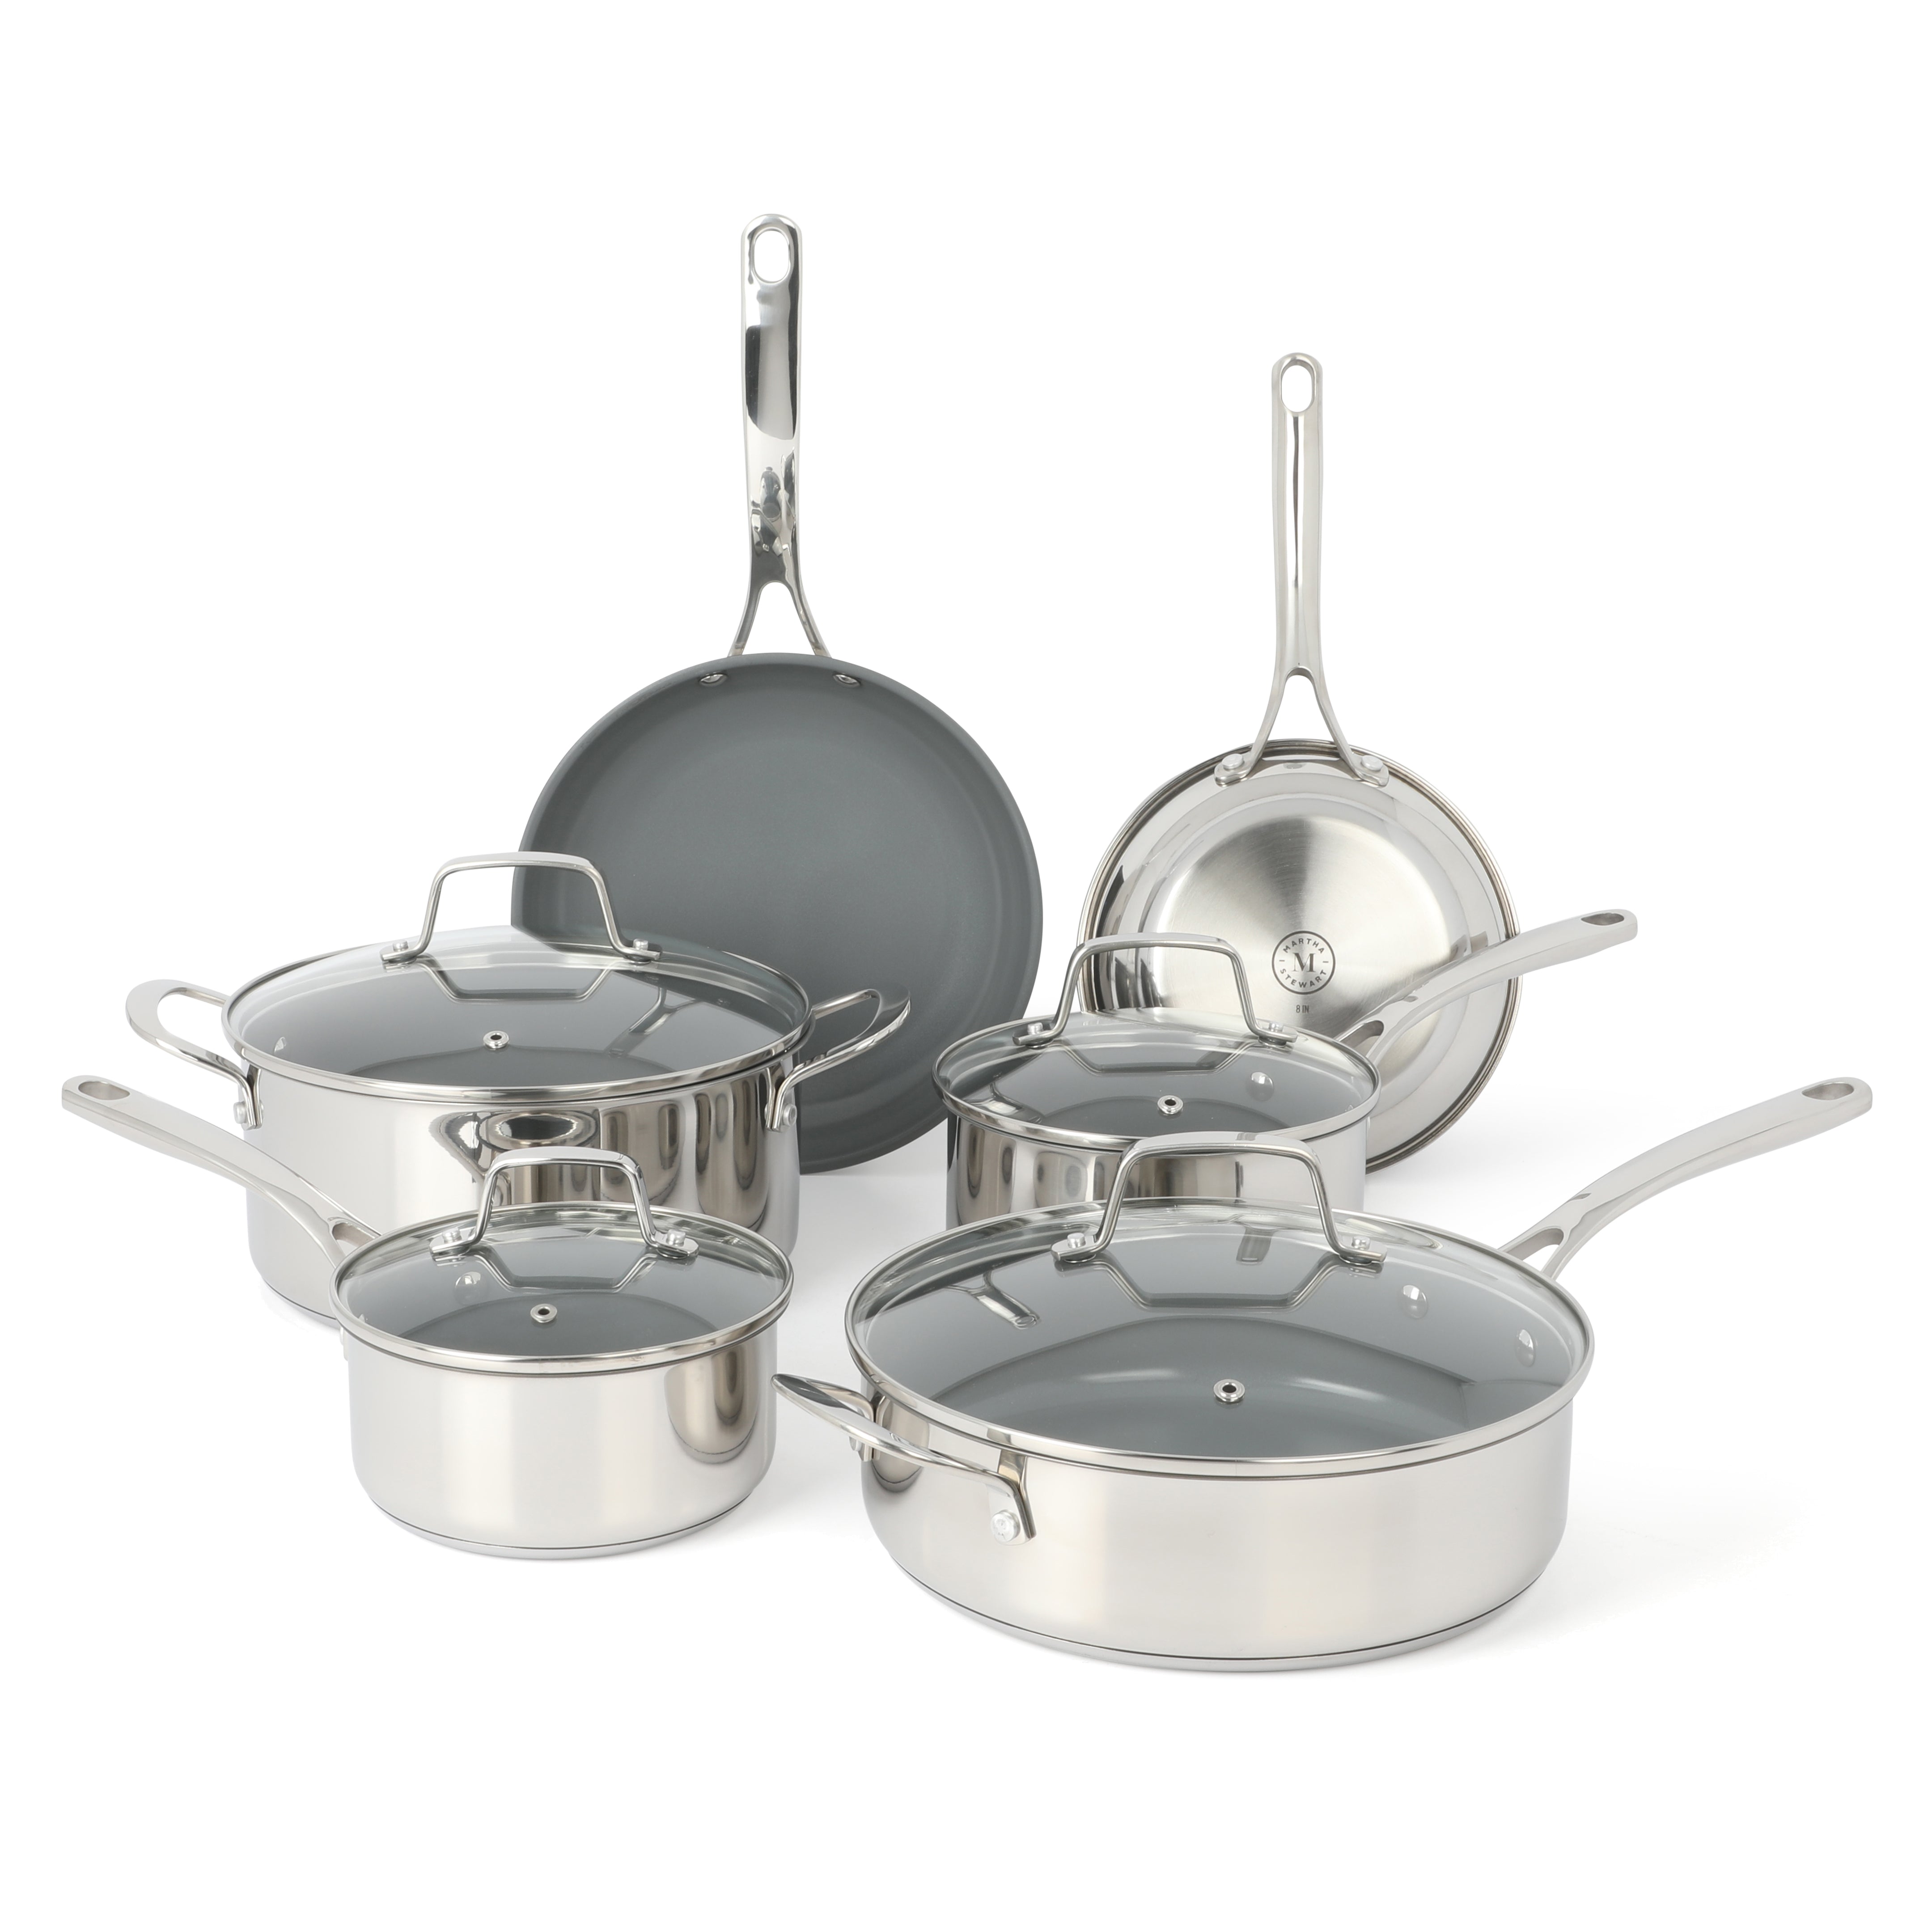 All-Clad All Clad Stainless Steel Nonstick 10-Piece Cookware Set